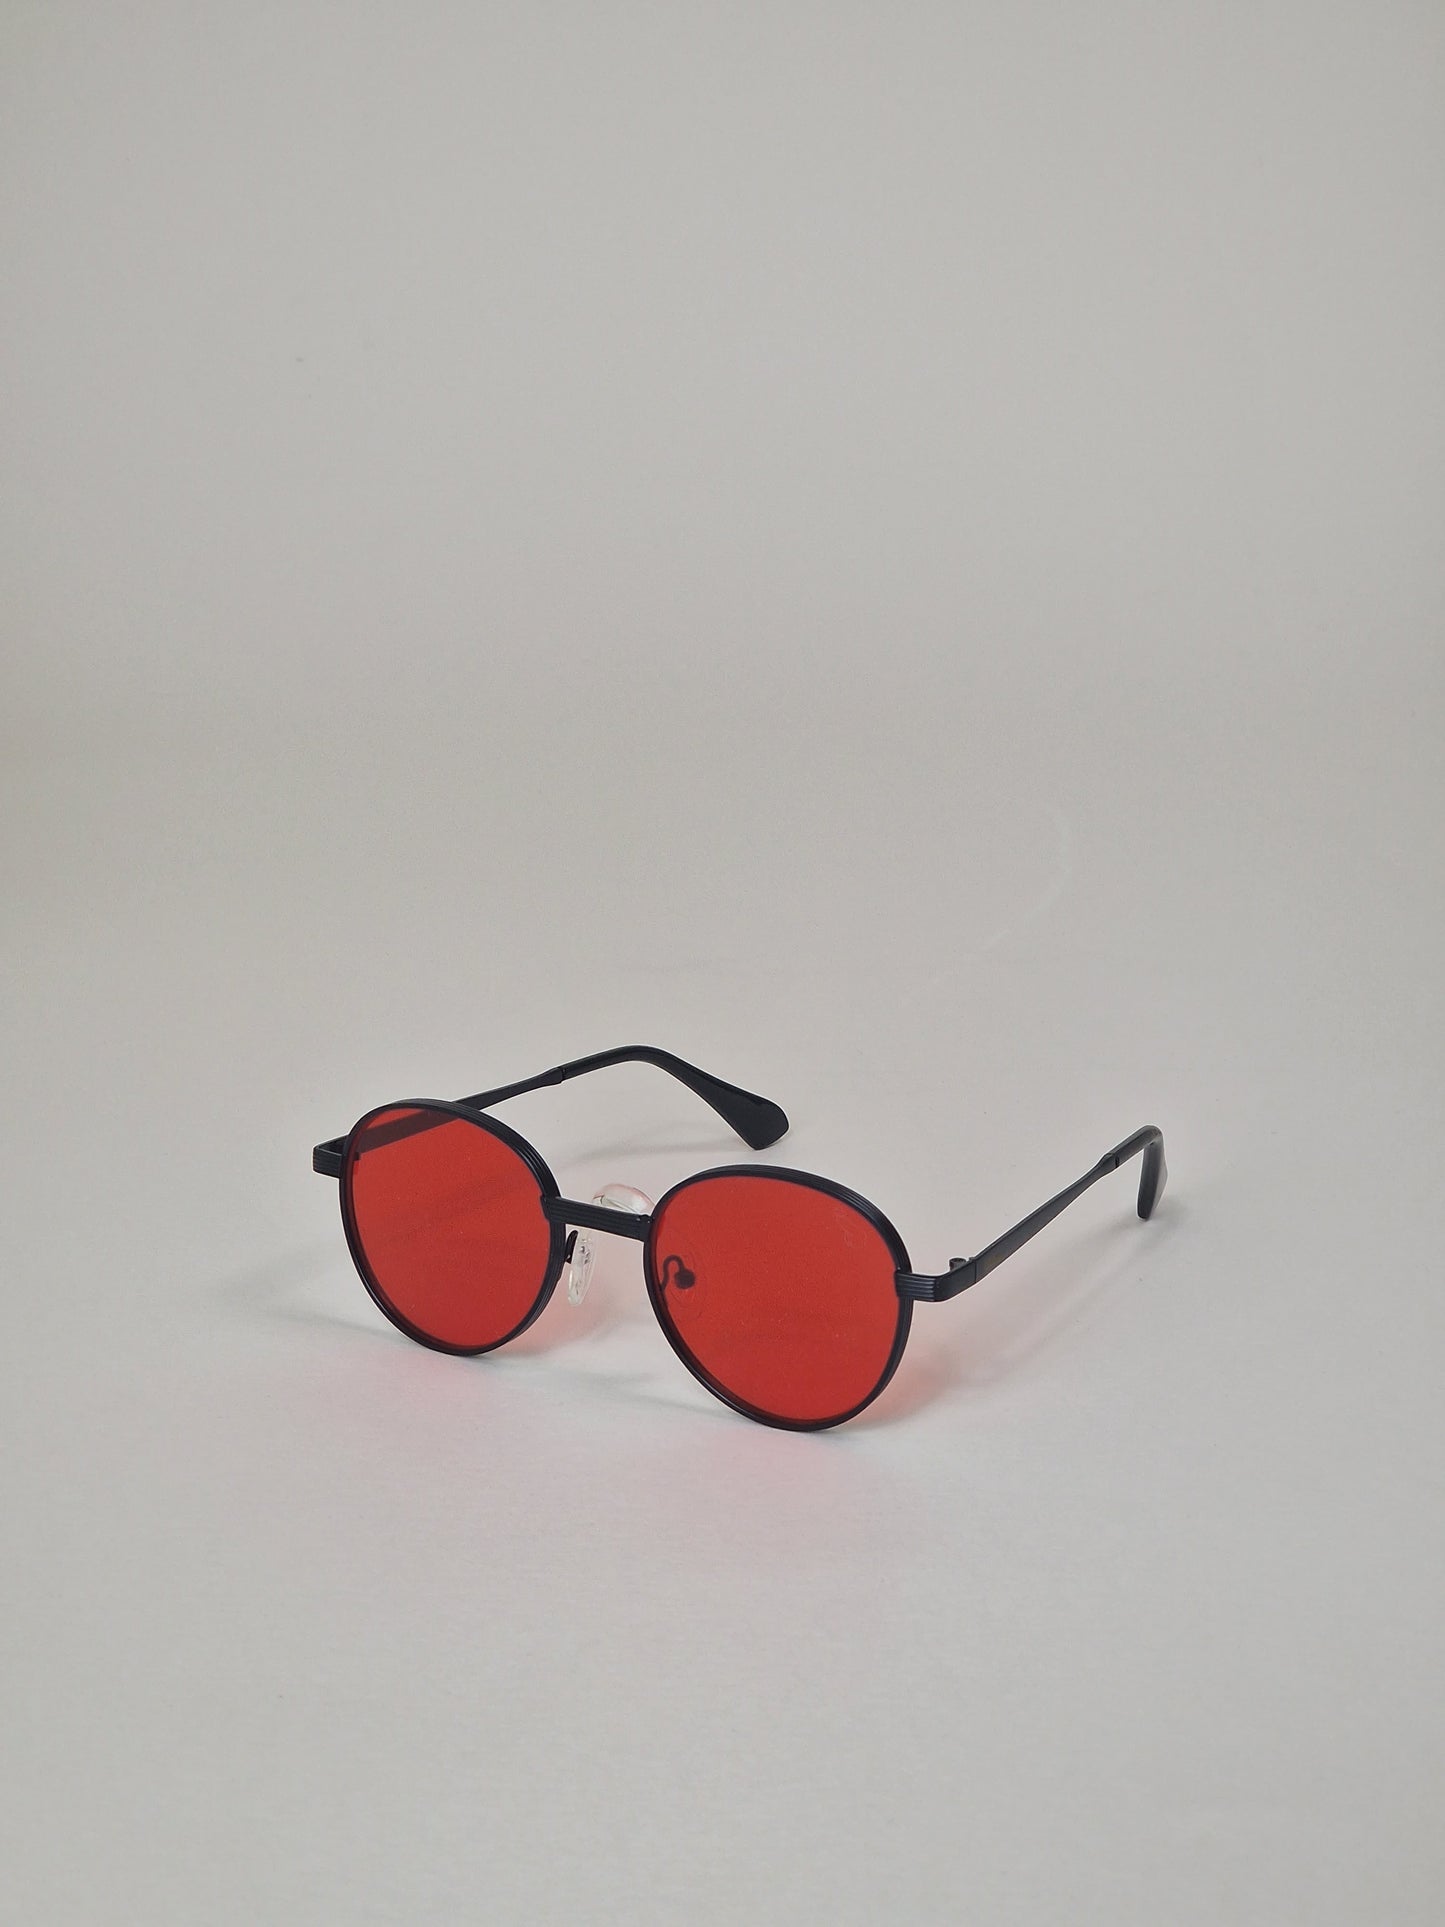 Sunglasses, model 25 - Red tinted.